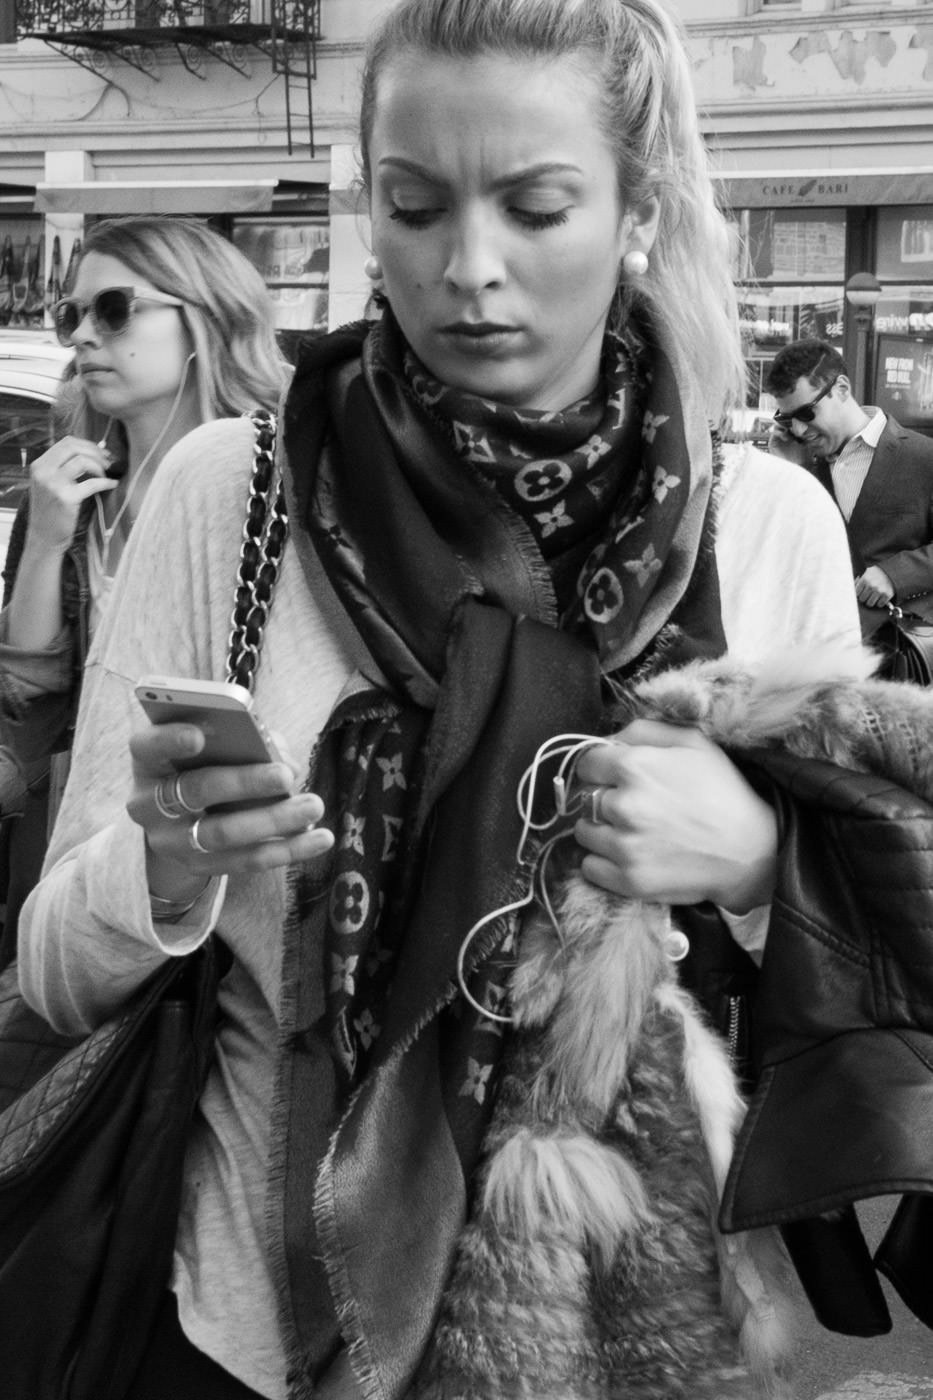 Street photography: Black and white portrait of ponytailed woman checking her phone